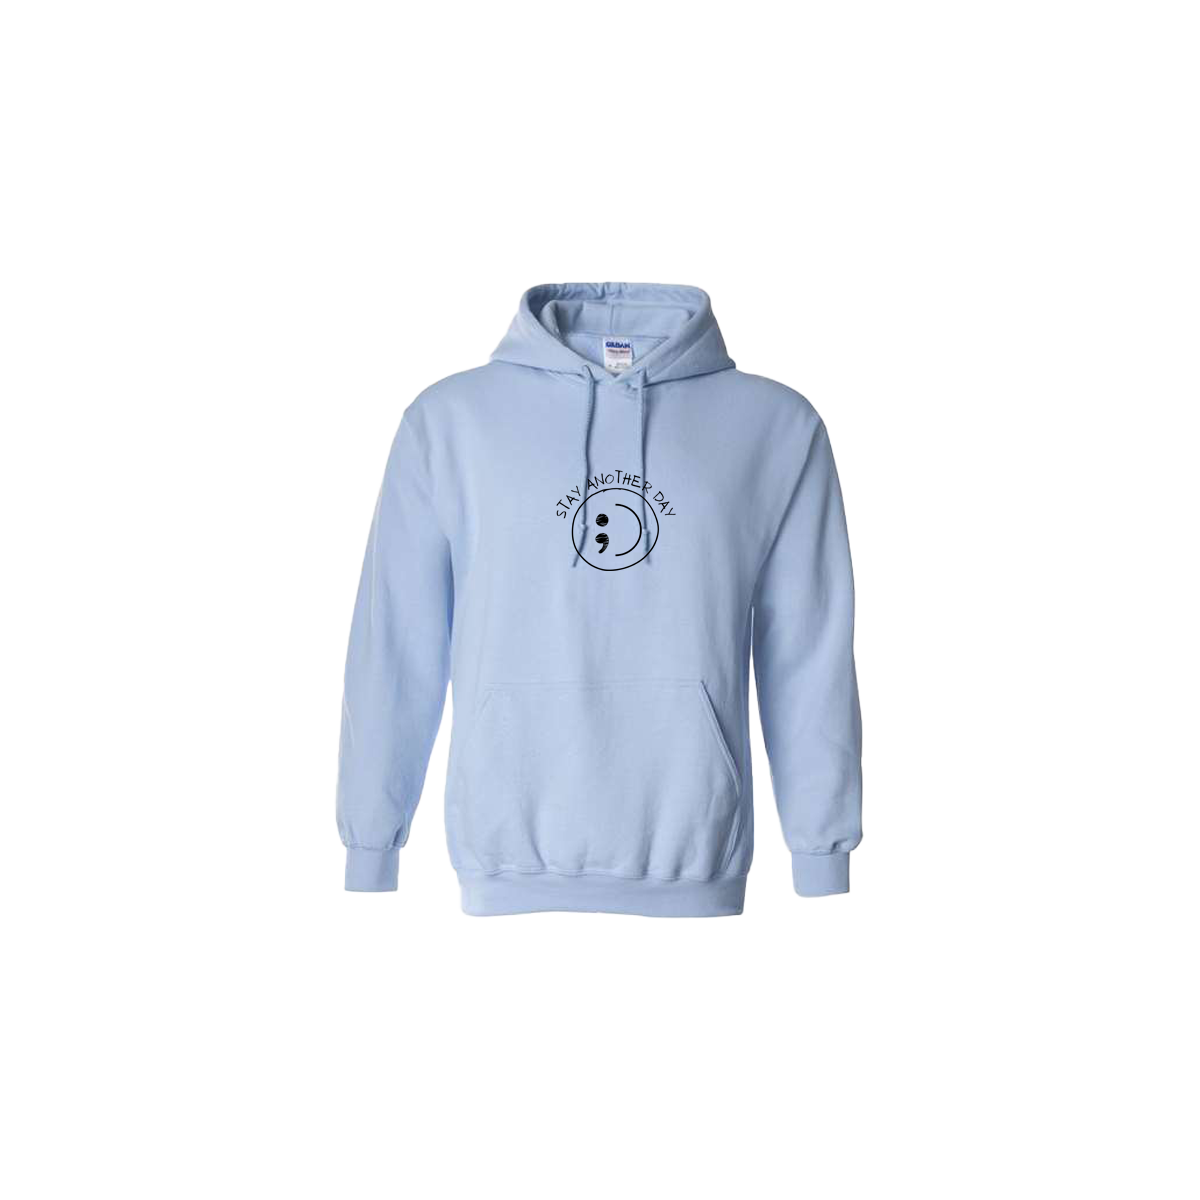 Stay Another Day Smiley Face Embroidered Light Blue Hoodie - Mental Health Awareness Clothing